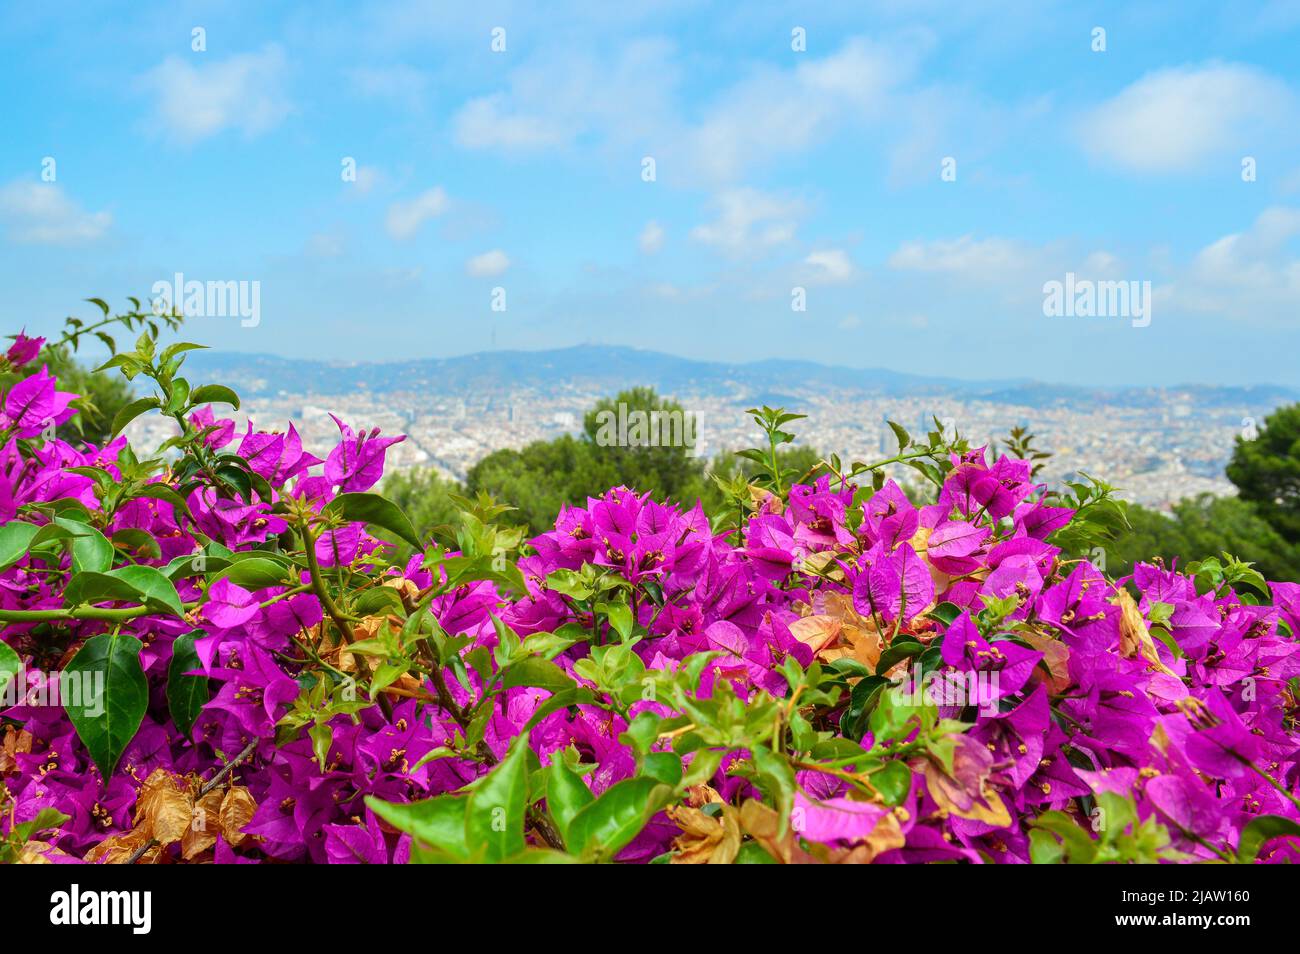 Violet bougainvillea in the foreground with landscape in the background Stock Photo